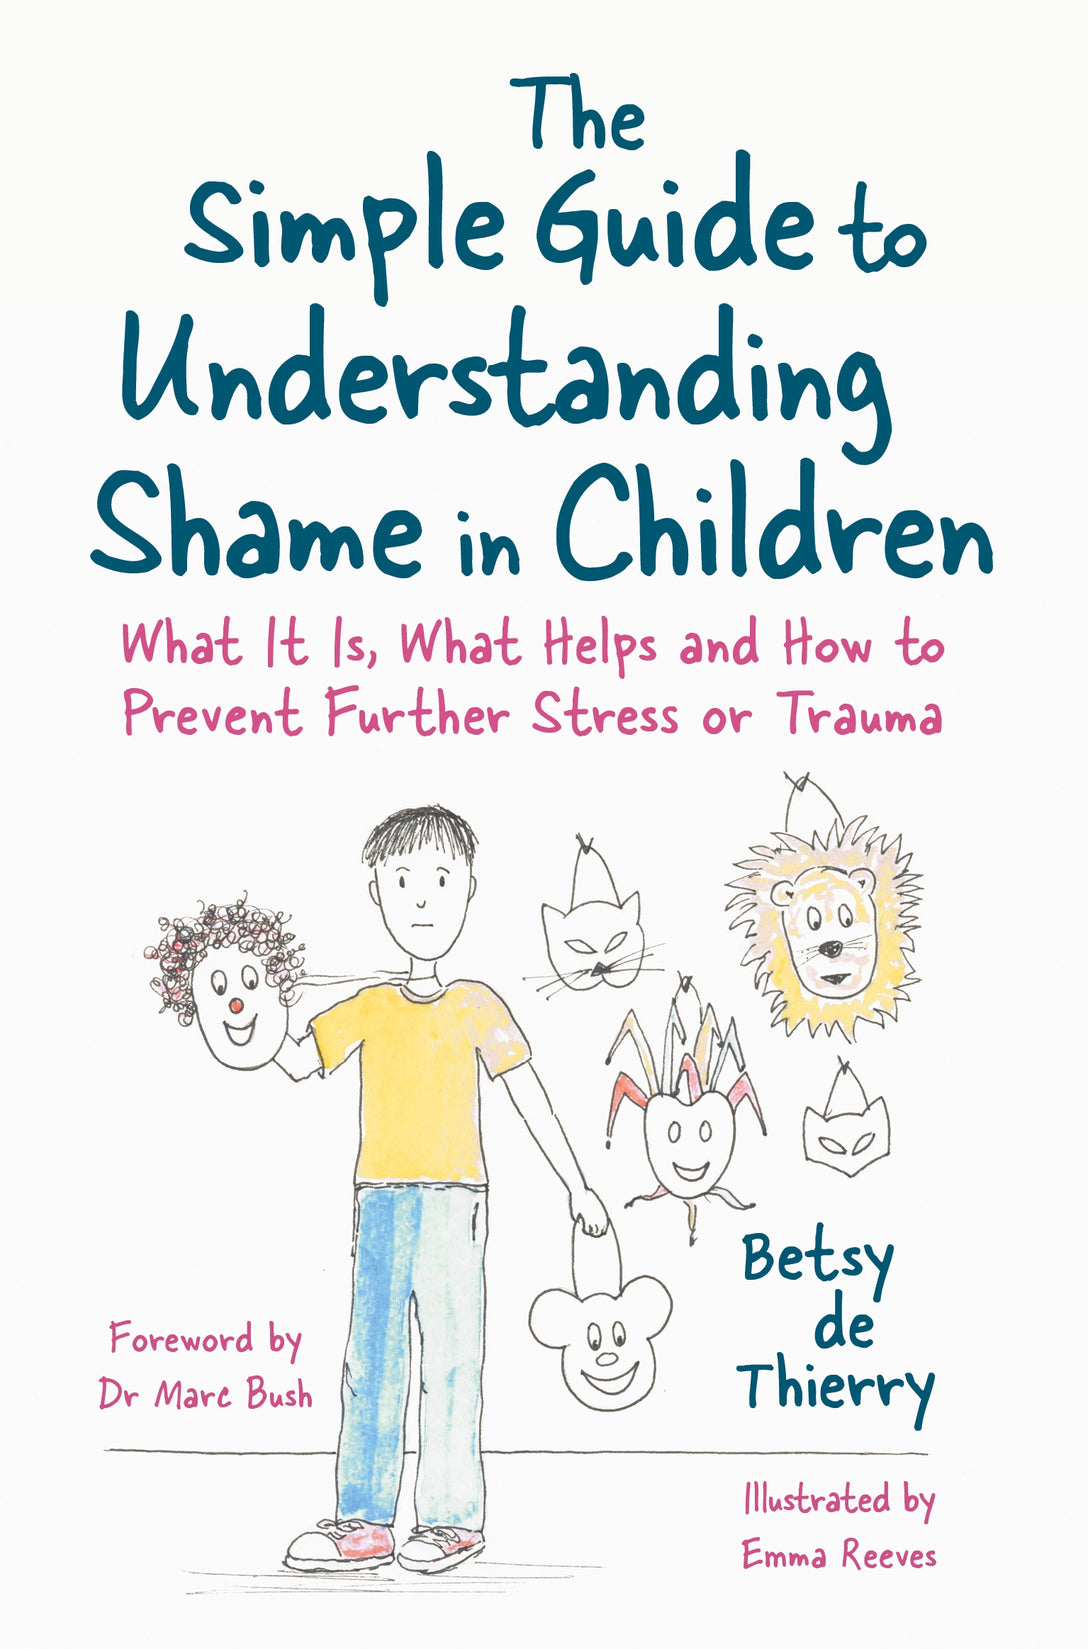 The Simple Guide to Understanding Shame in Children by Betsy de Thierry, Emma Reeves